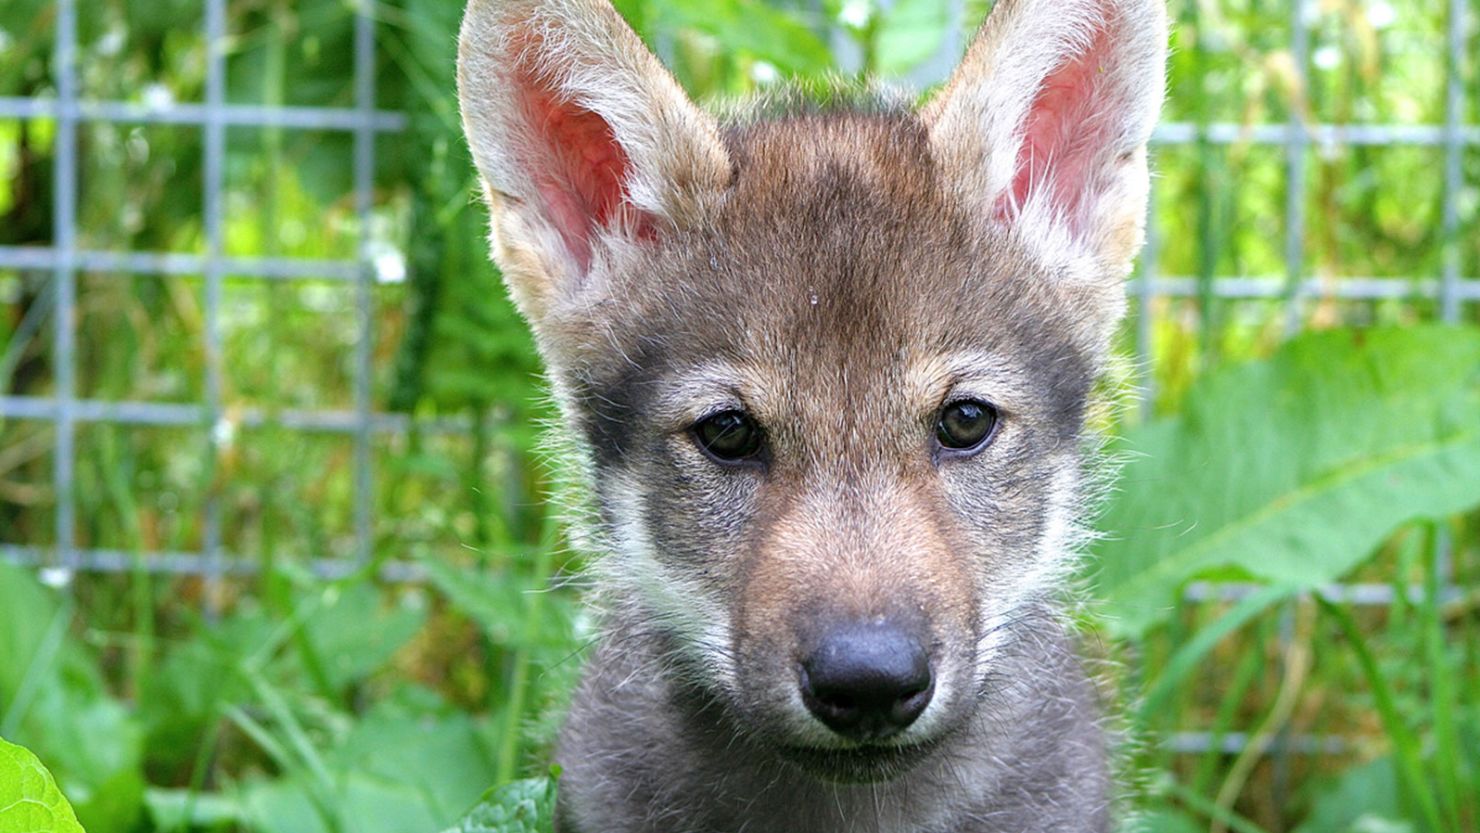 A wolf puppy named Flea who participated in the study.